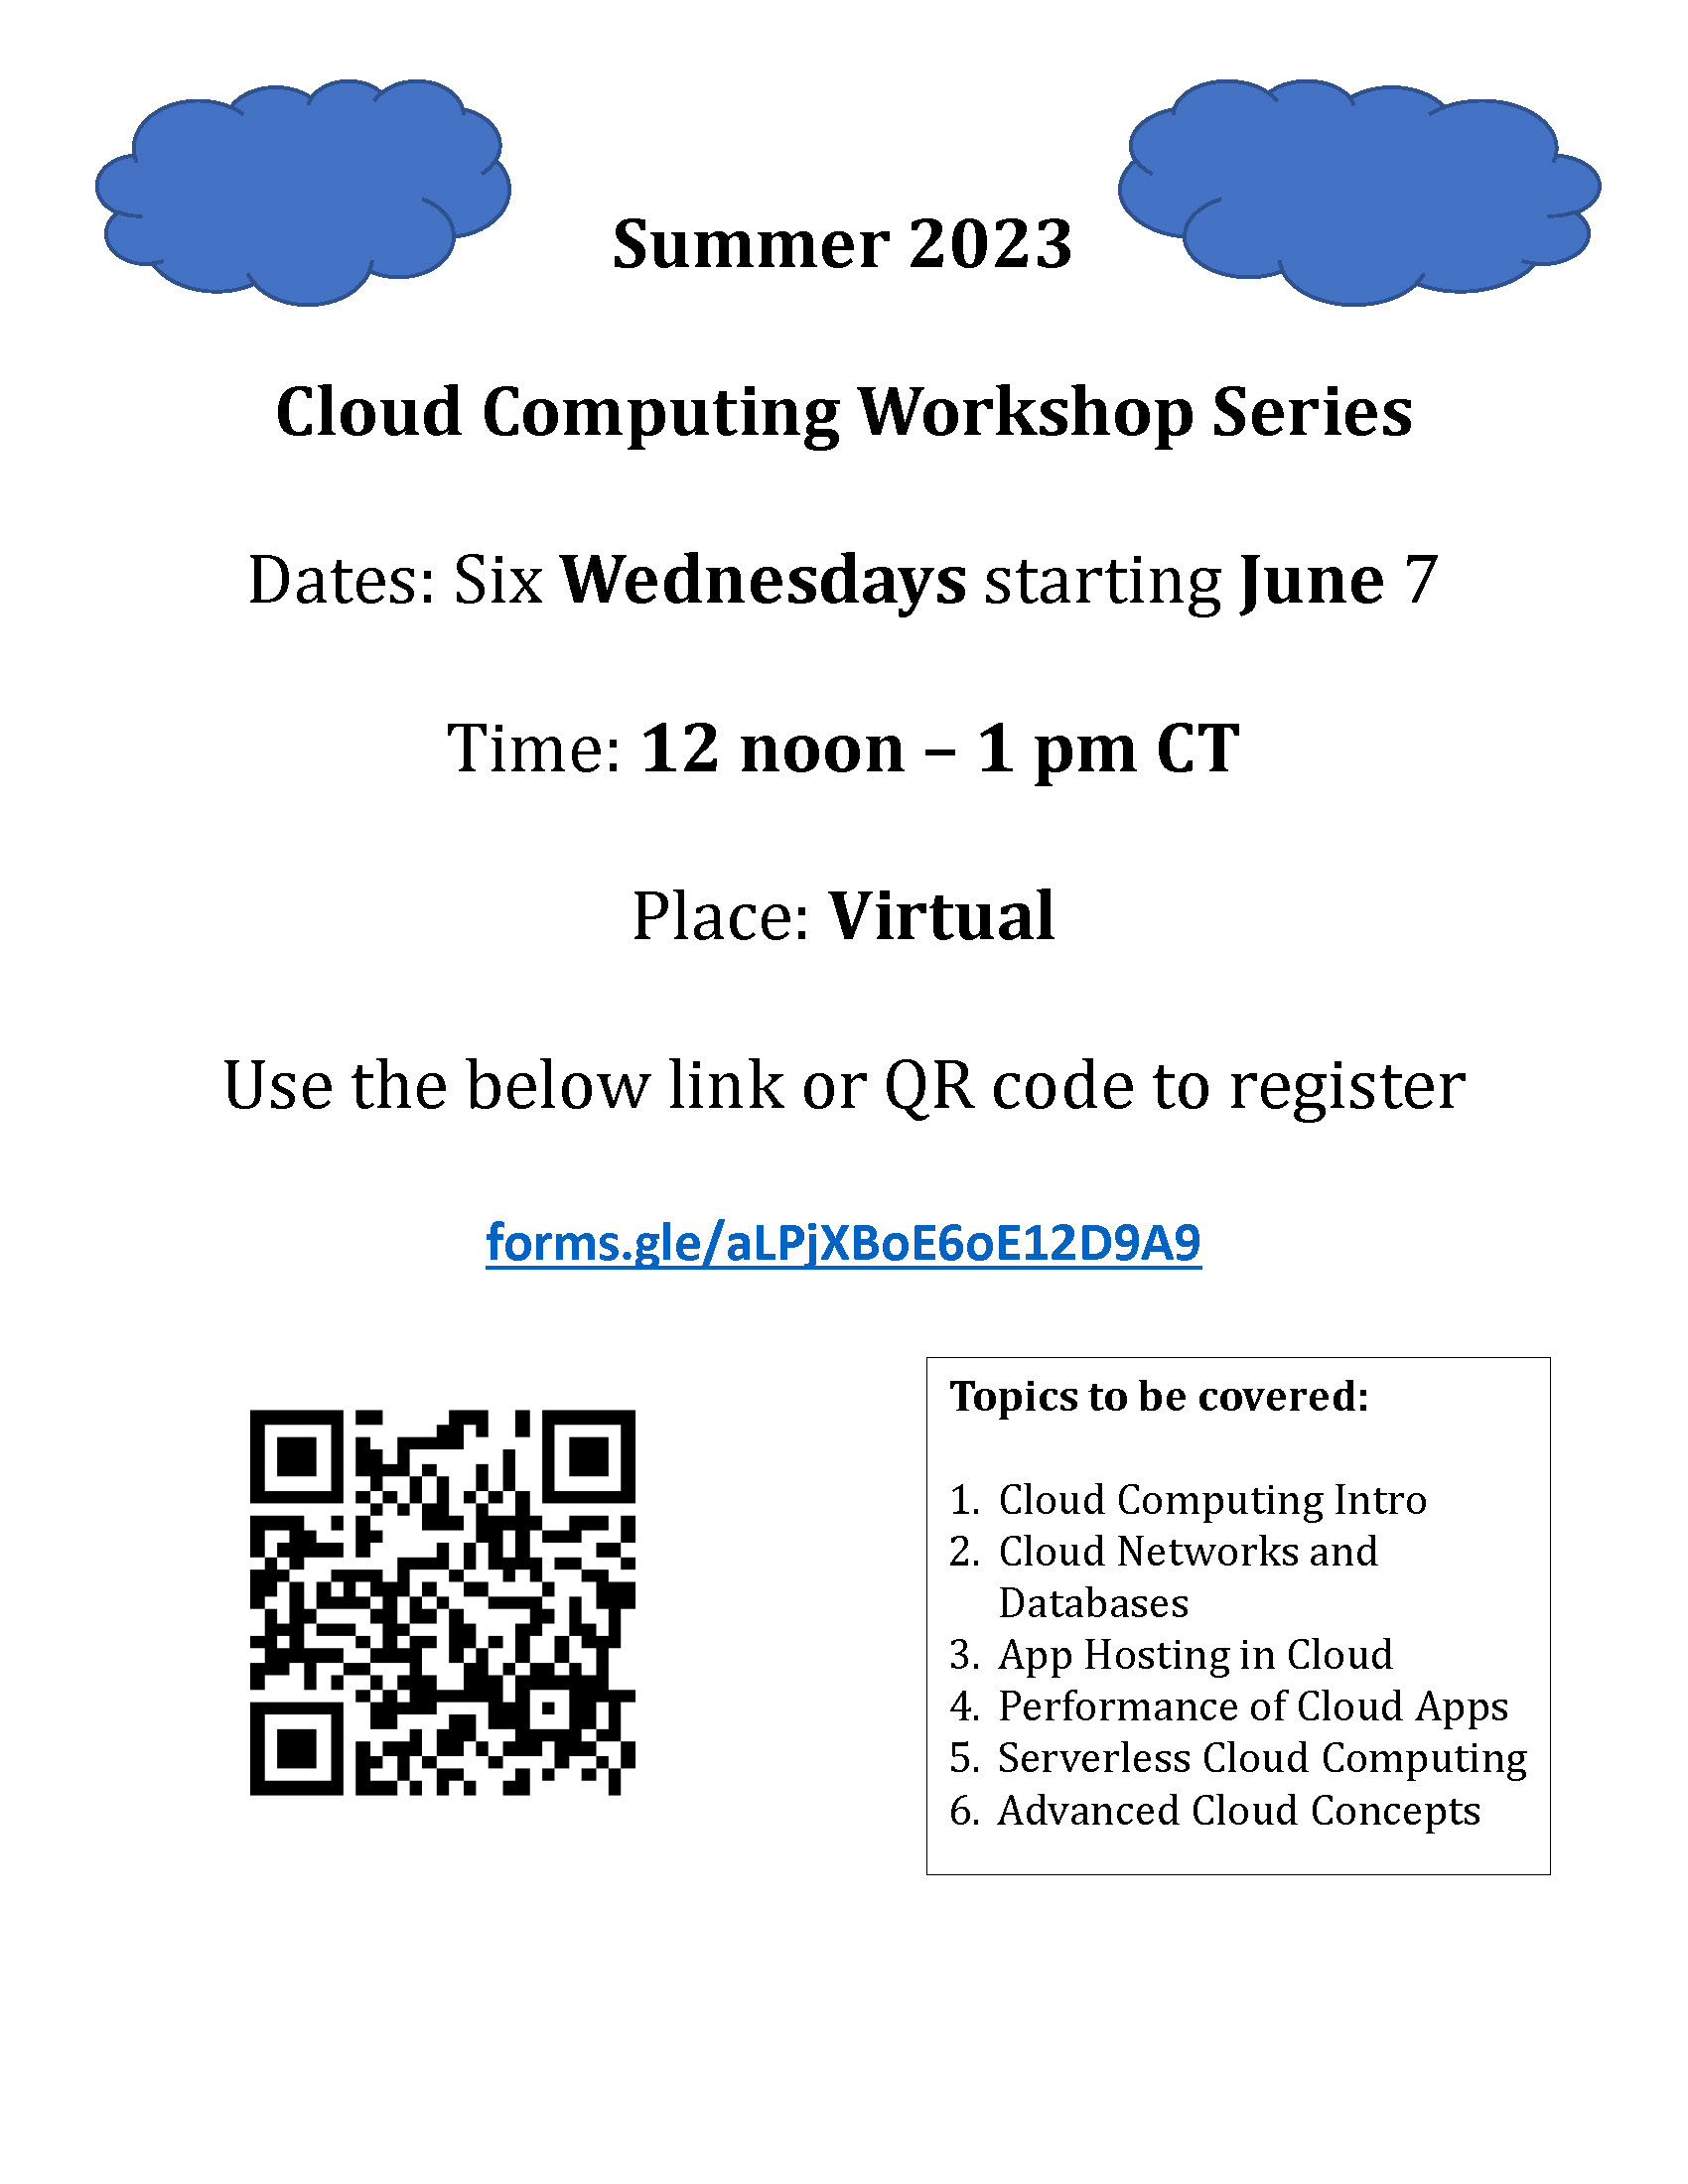 Summer 2023 Cloud Computing Workshop Series Dates: Six Wednesdays starting June 7 Time: 12 noon – 1 pm CT Place: Virtual Use the below link or QR code to register forms.gle/aLPjXBoE6oE12D9A9 Topics to be covered: 1. Cloud Computing Intro 2. Cloud Networks